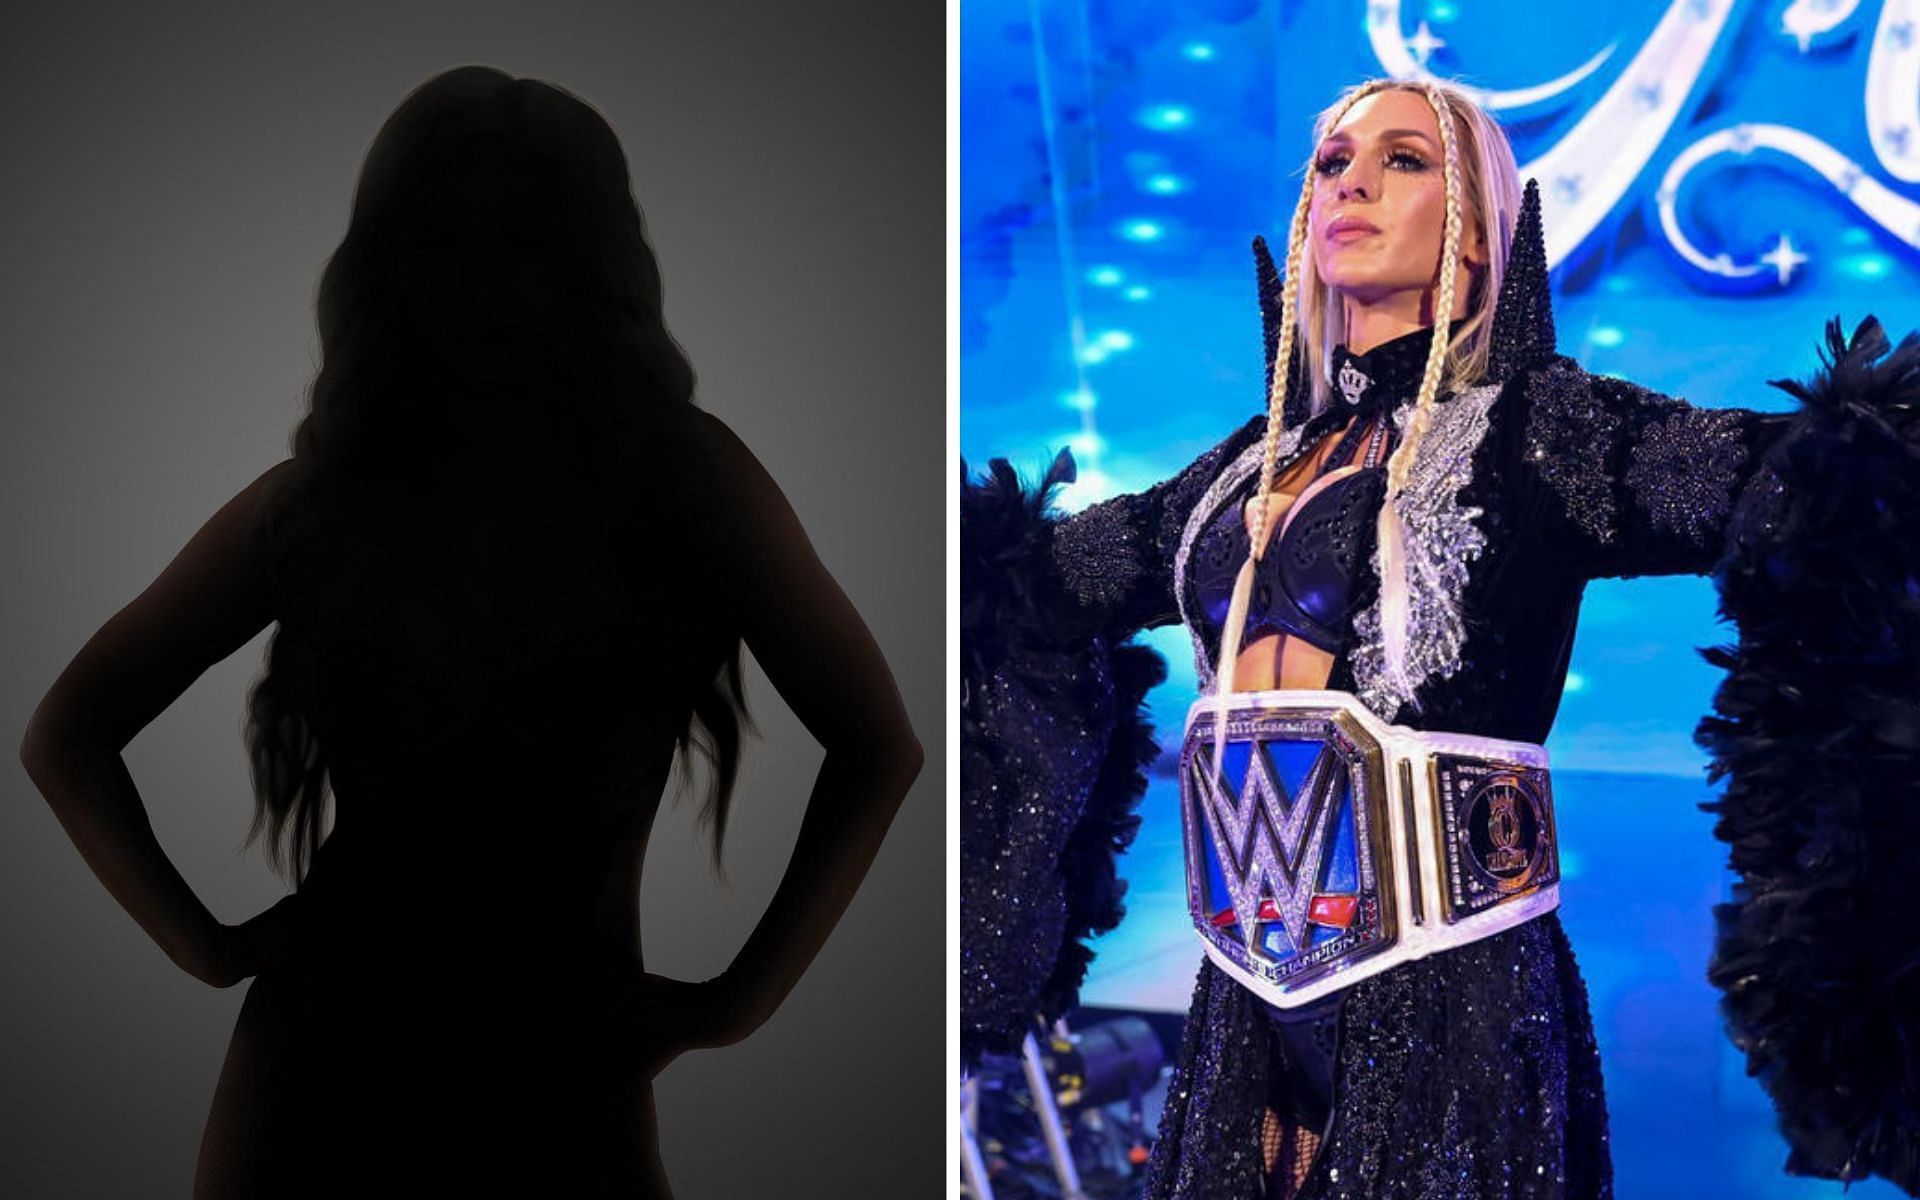 Charlotte Flair is a multi-time WWE Women